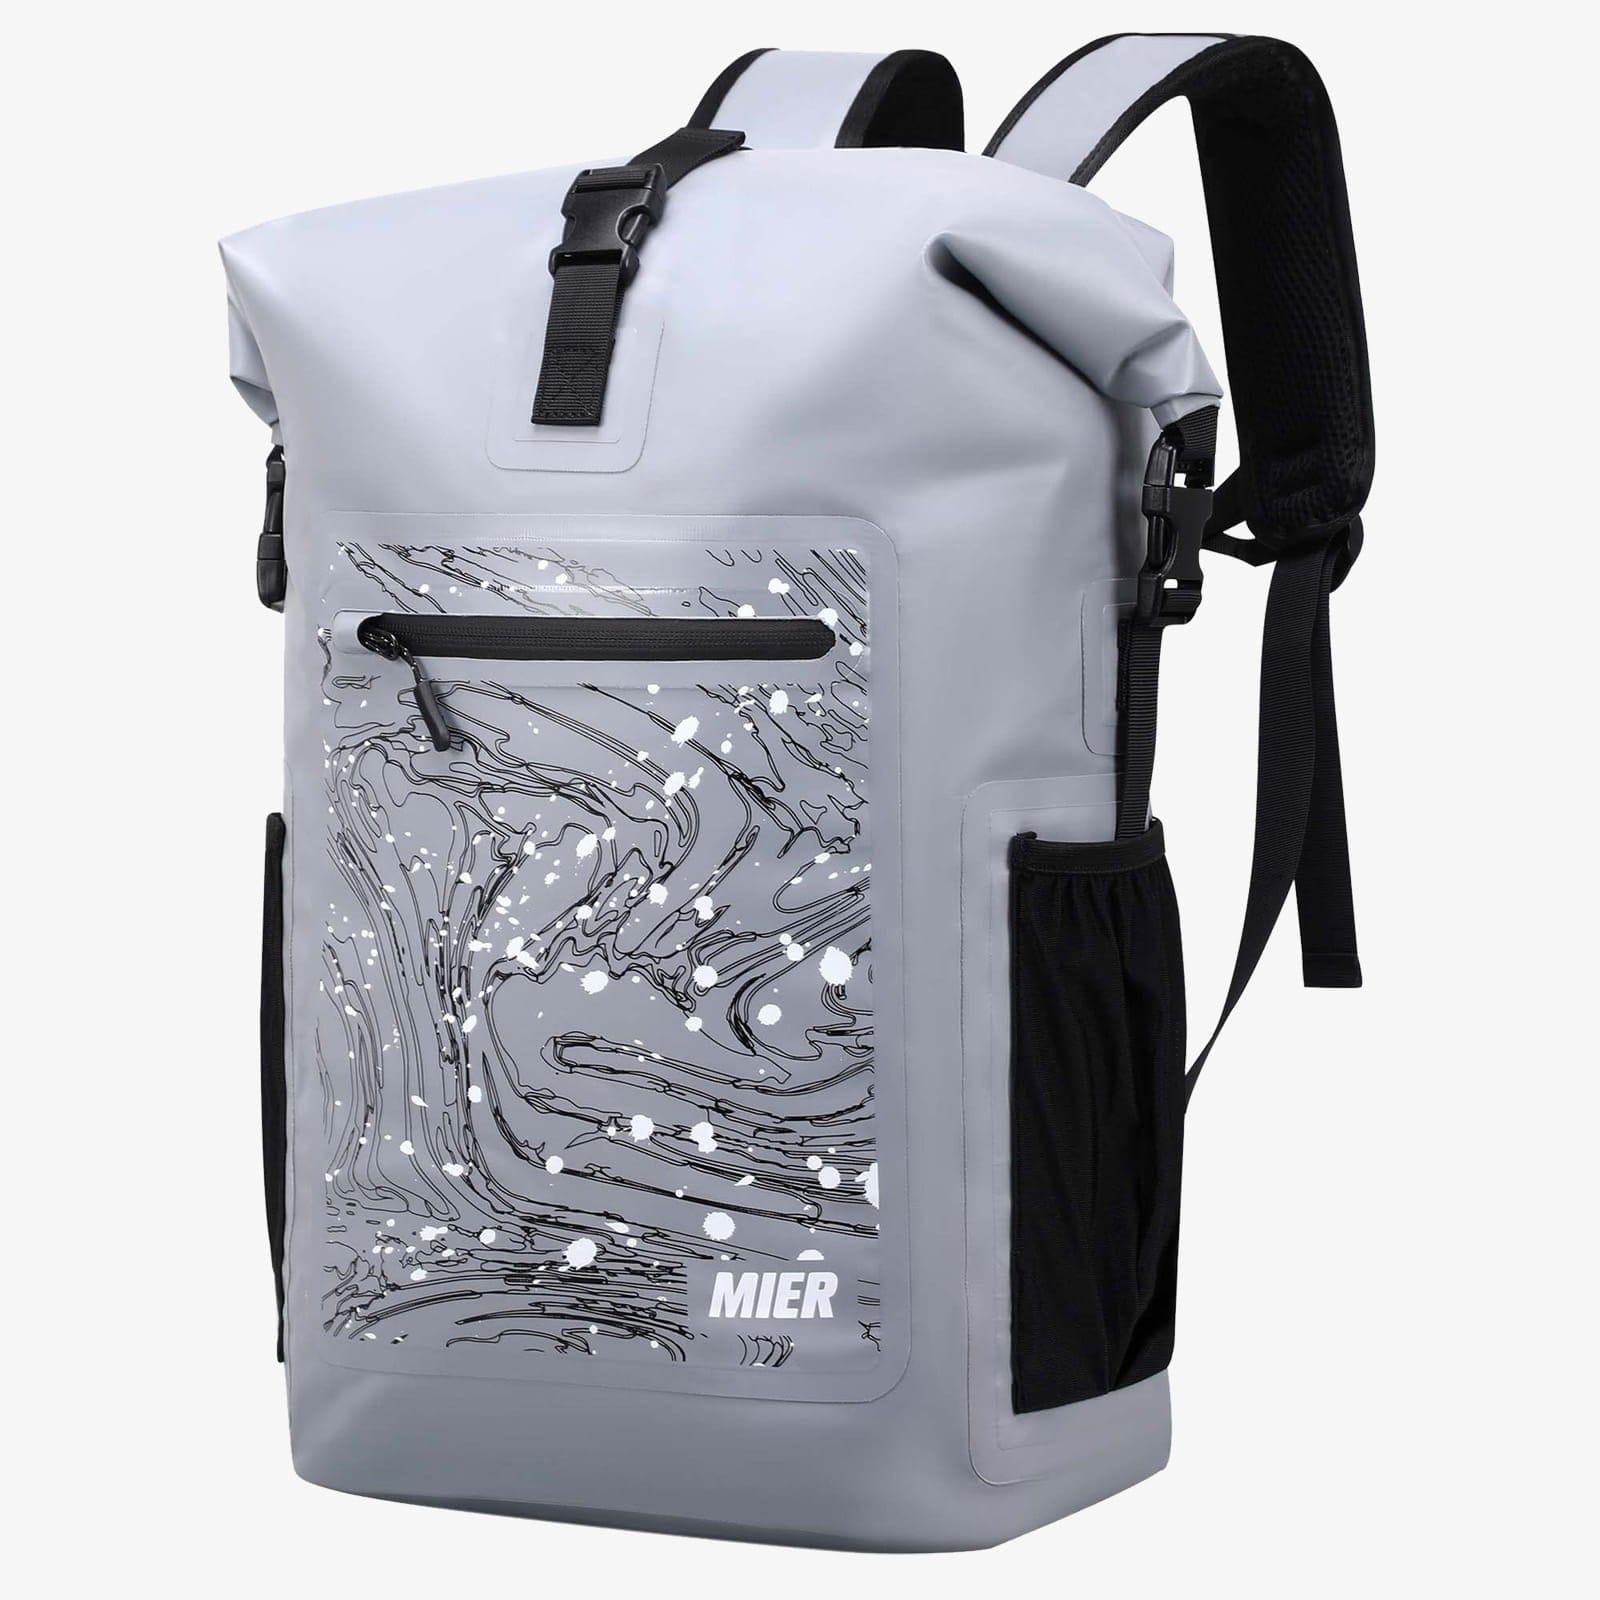 MIER Insulated Lunch Bags with Dual Compartment Wide Open